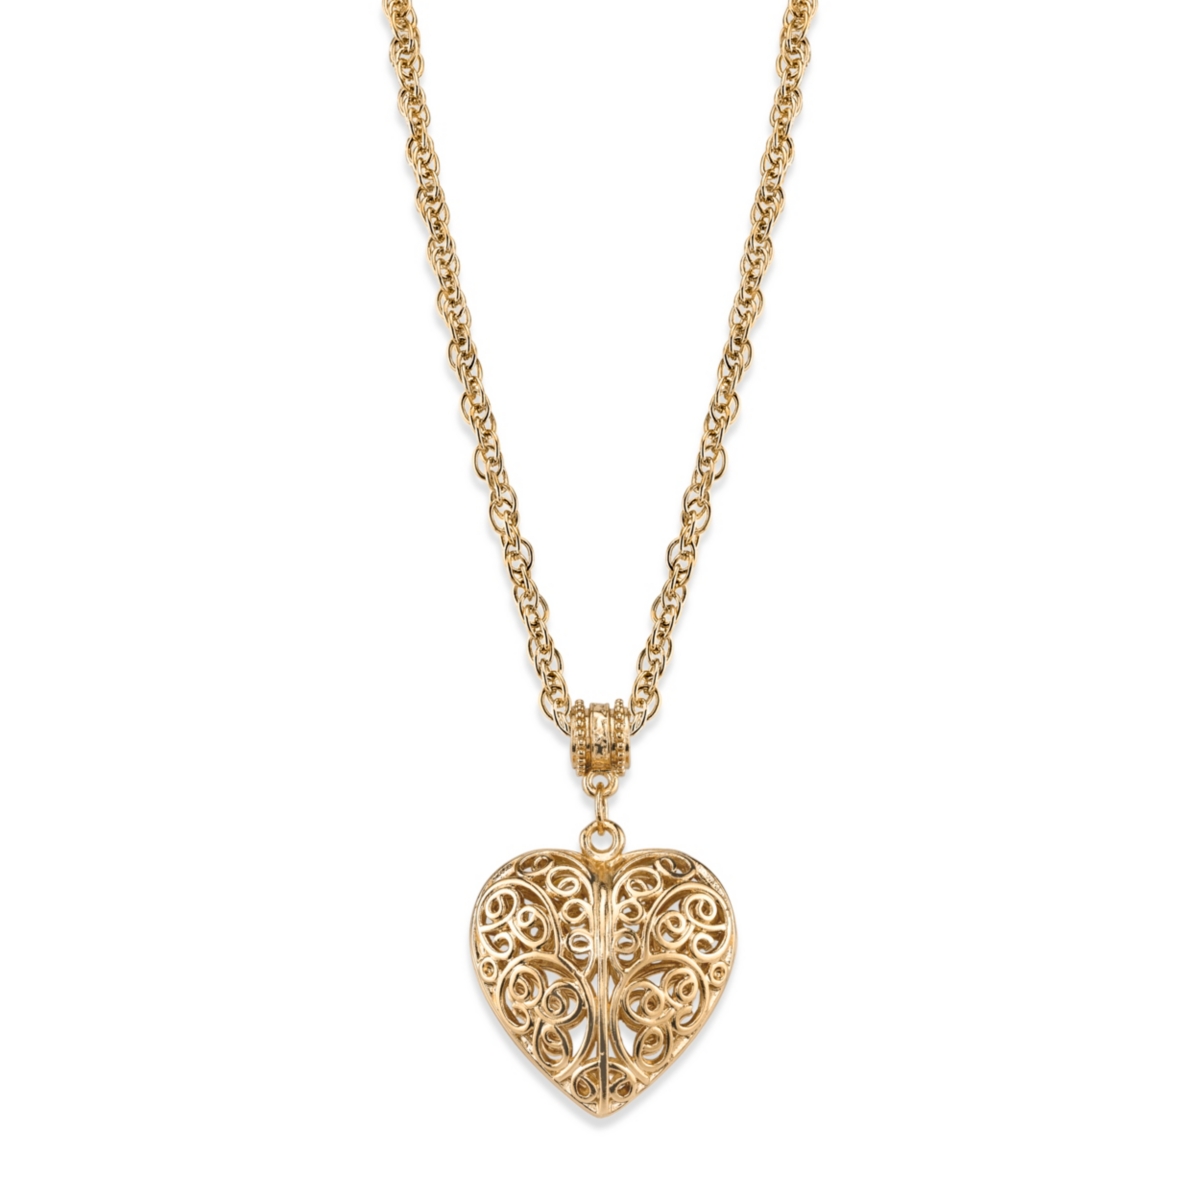 2028 14k Gold-dipped Filigree Heart With Crystal Accent Necklace 18"